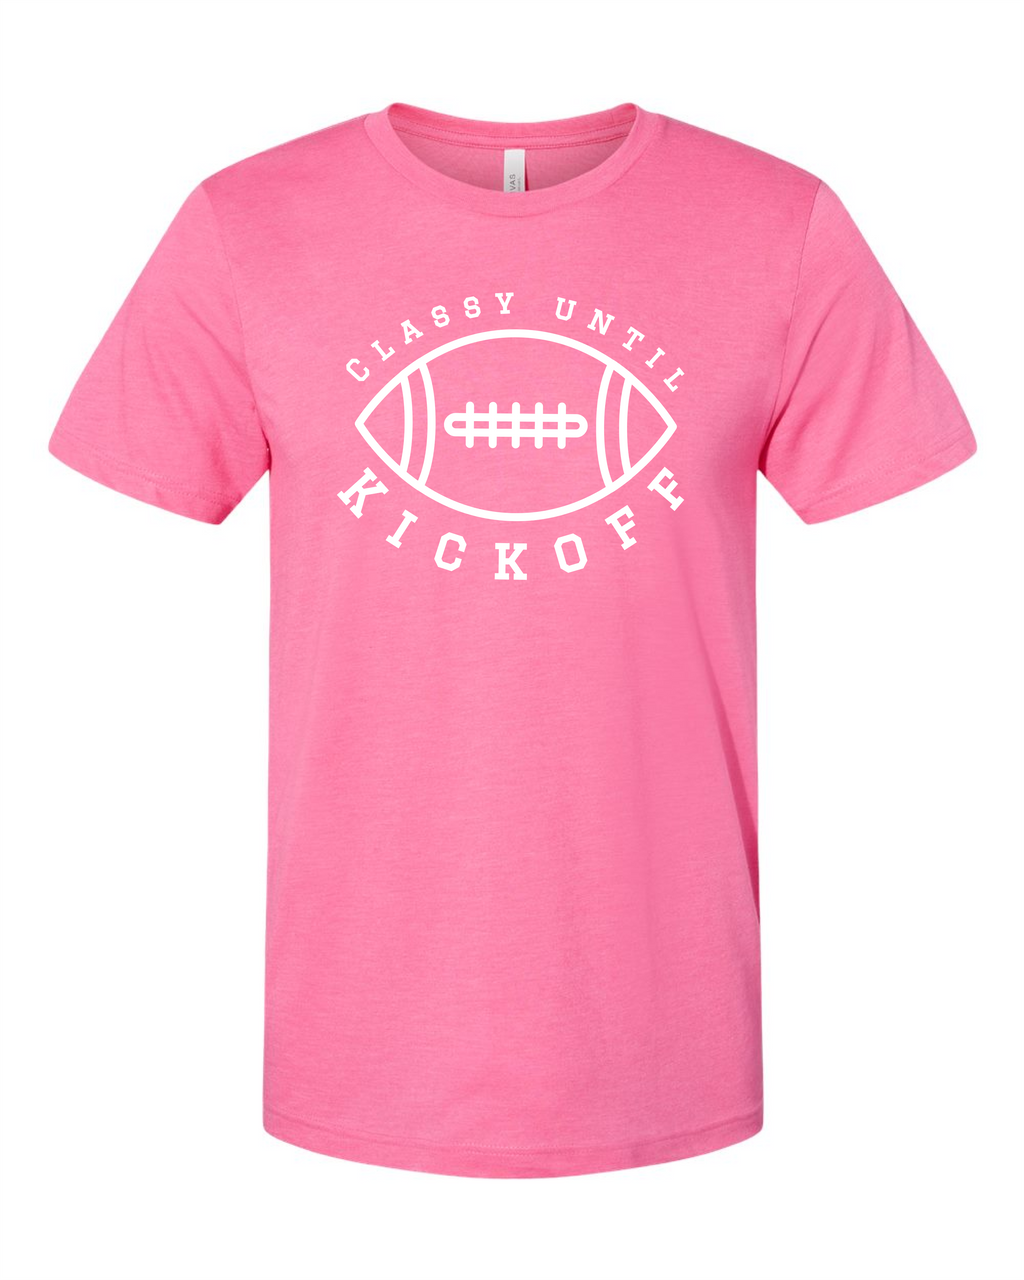 "classy until kickoff" tee in heather pink